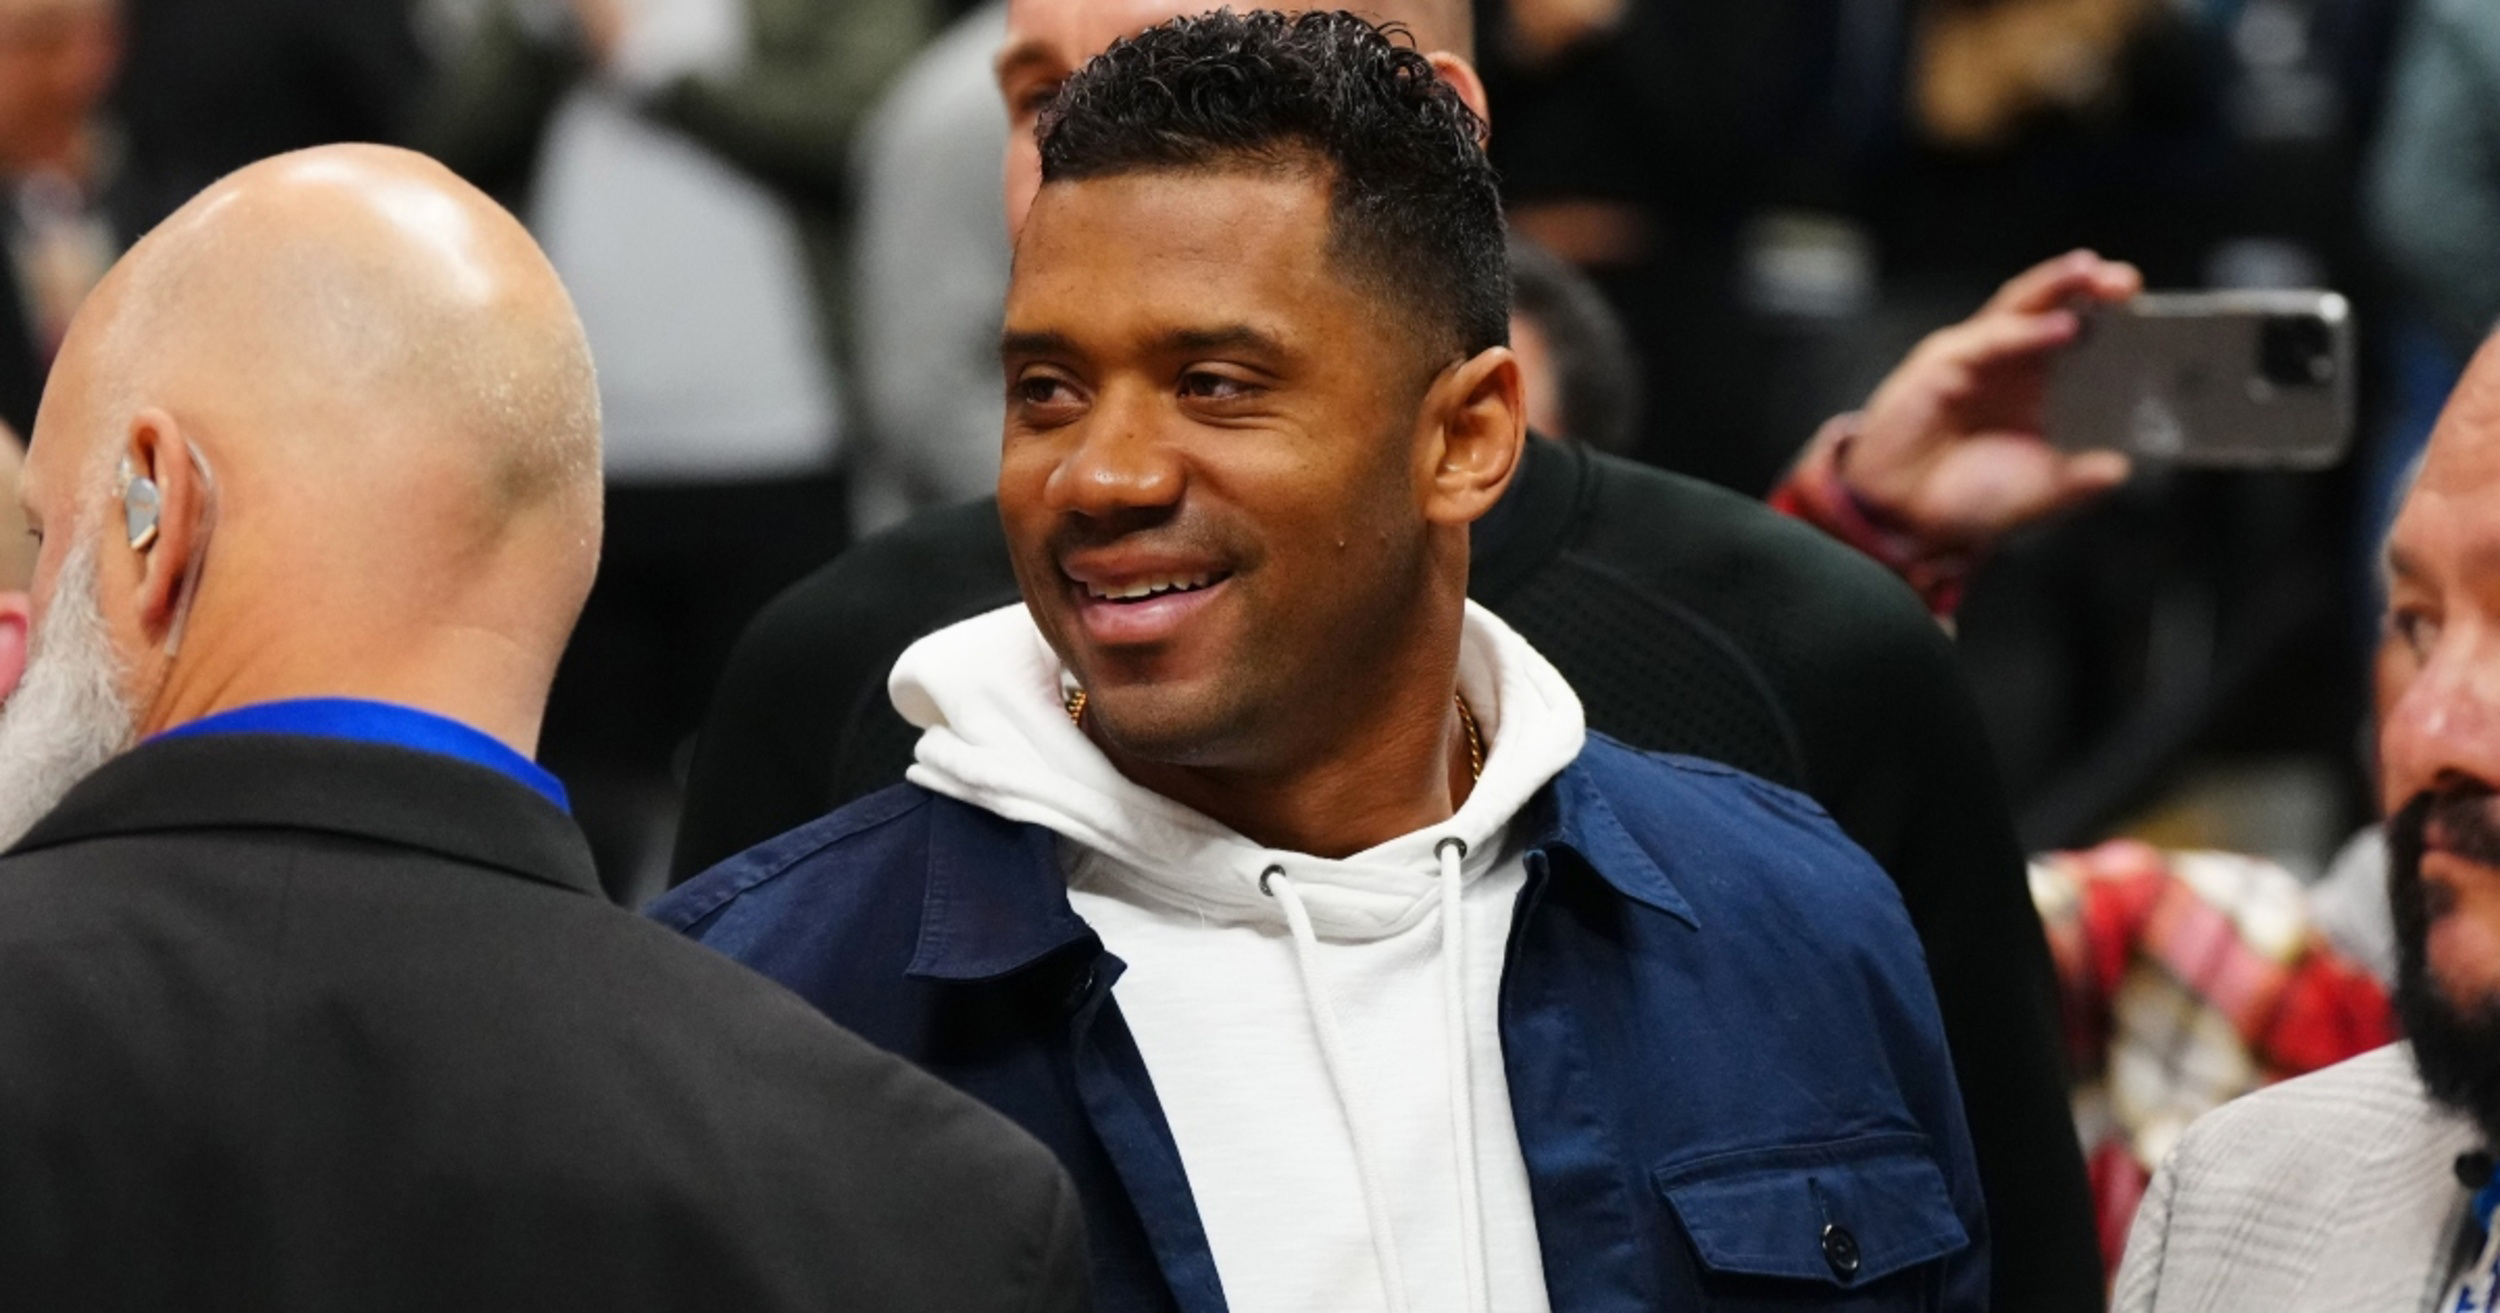 Russell Wilson dresses up as Coach Prime for Halloween